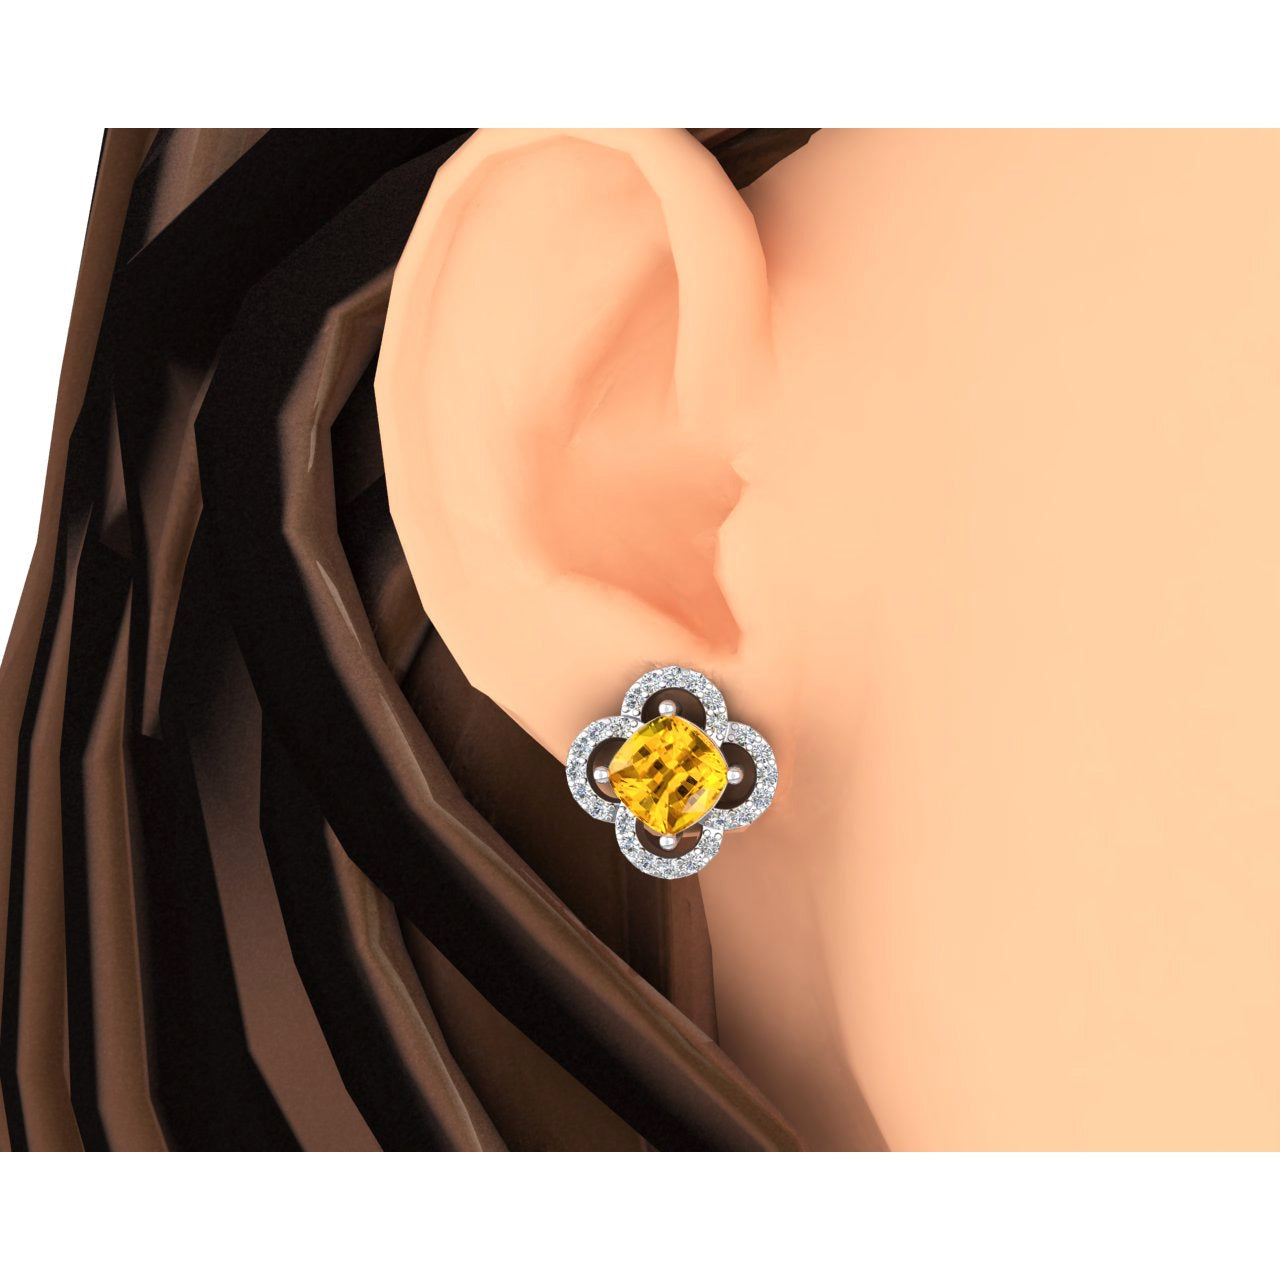 Clover Leaf Style Yellow Sapphire and Diamond Earrings 7.75 Carats - Gemstone Earring-harrychadent.ca